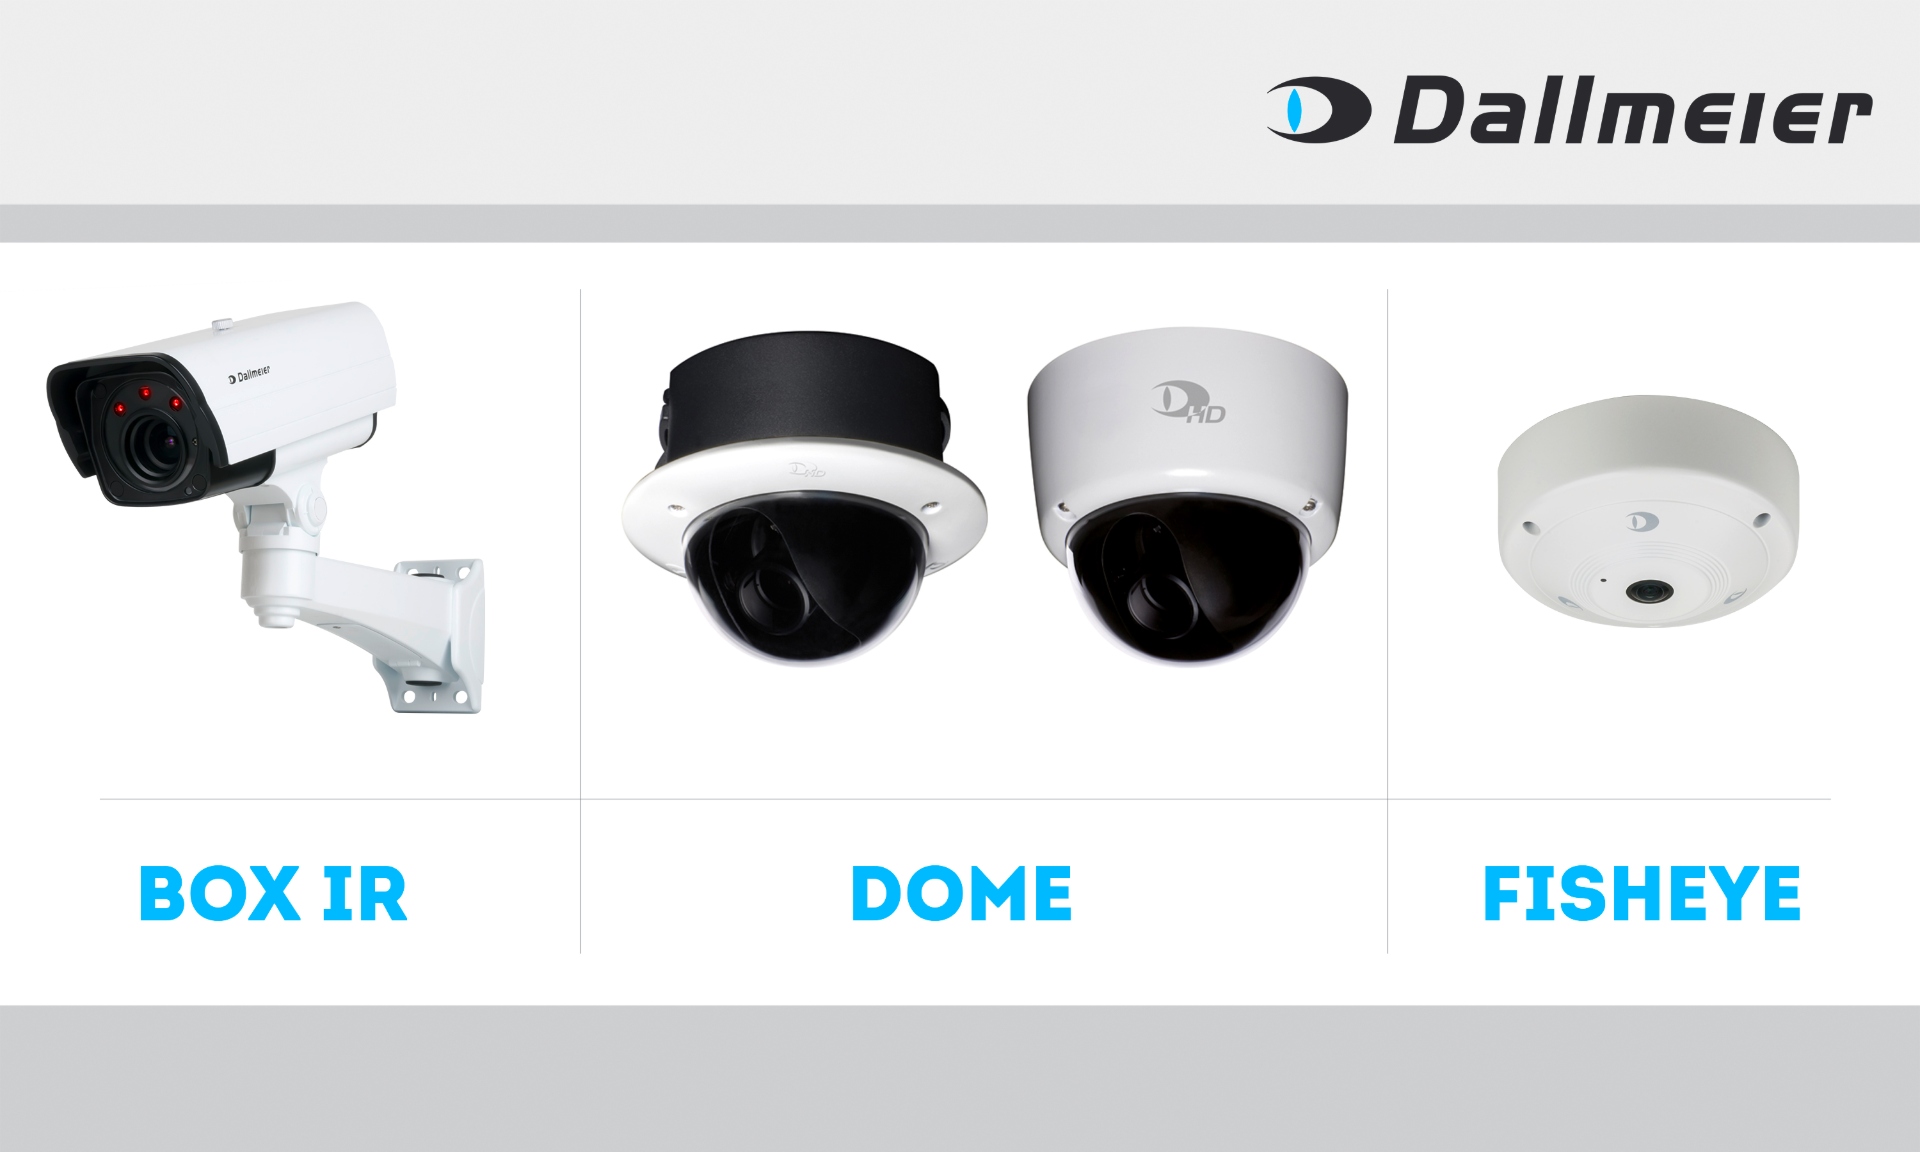 Data rate reduced by up to 50% and AI-supported object classification in new Dallmeier Camera Series 5000